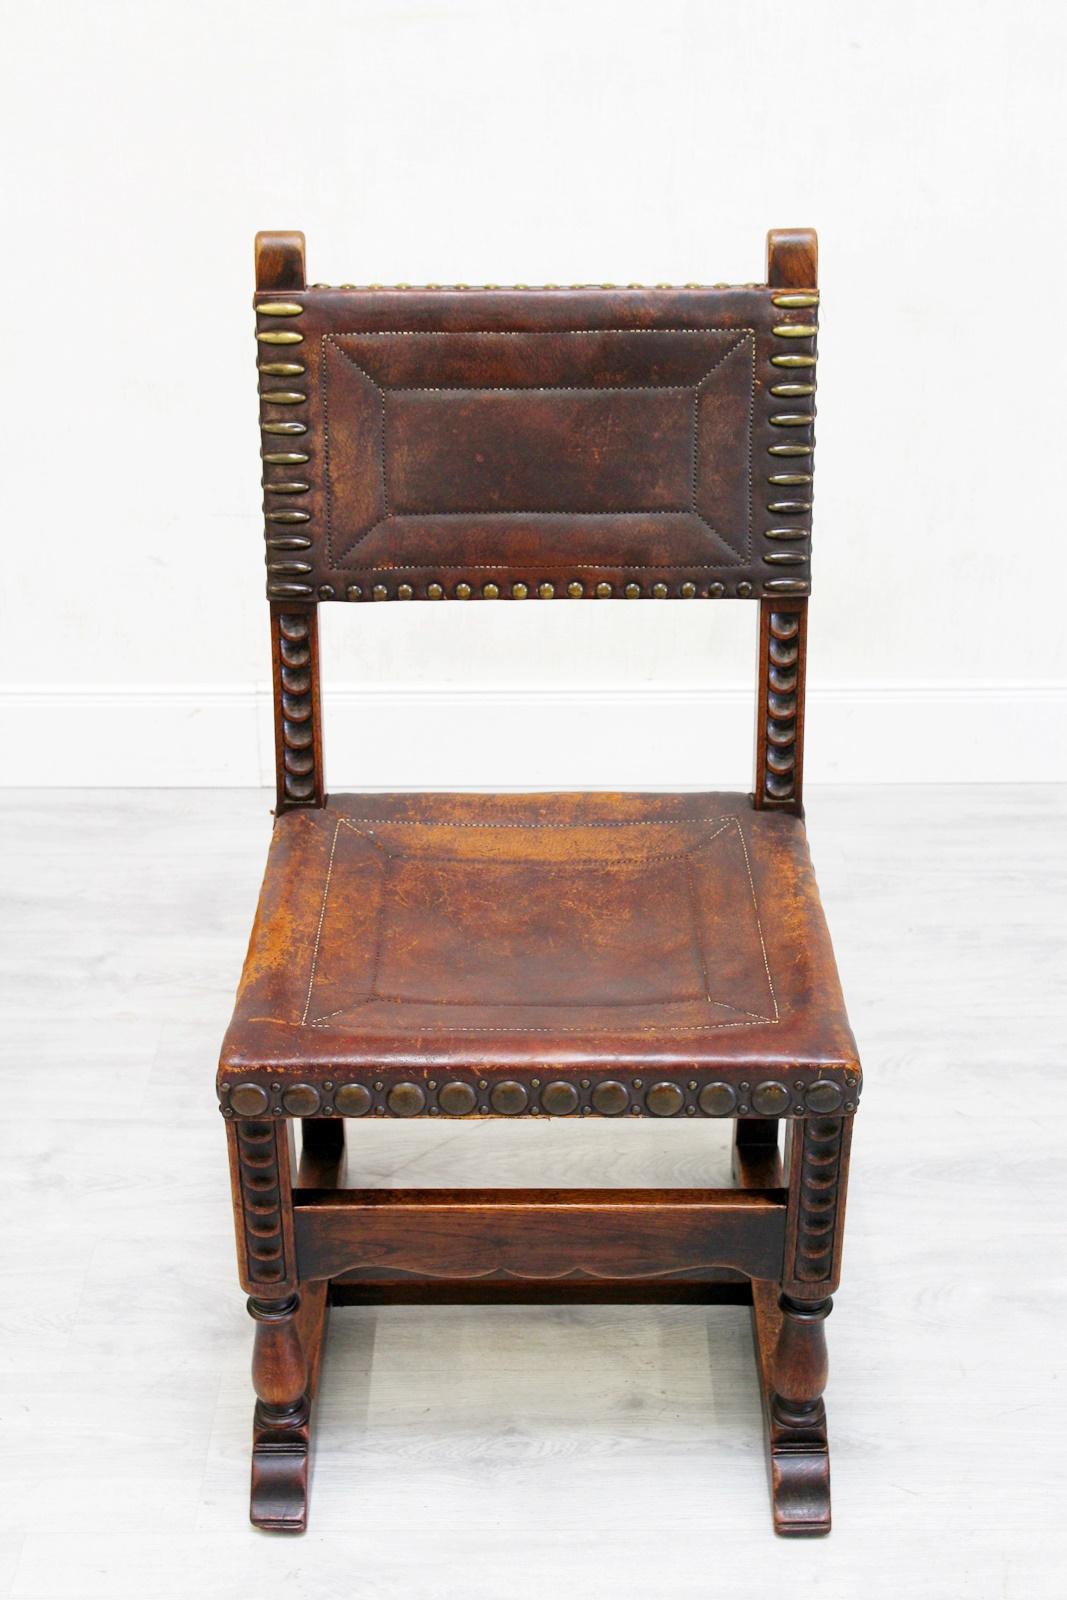 Rarity and very rare
Four antique monastery chairs
1880-1900
Measures: Height x 95cm width x 60cm depth x 53cm
Condition: The chairs are in a very good condition for the age and still have the charm of the 